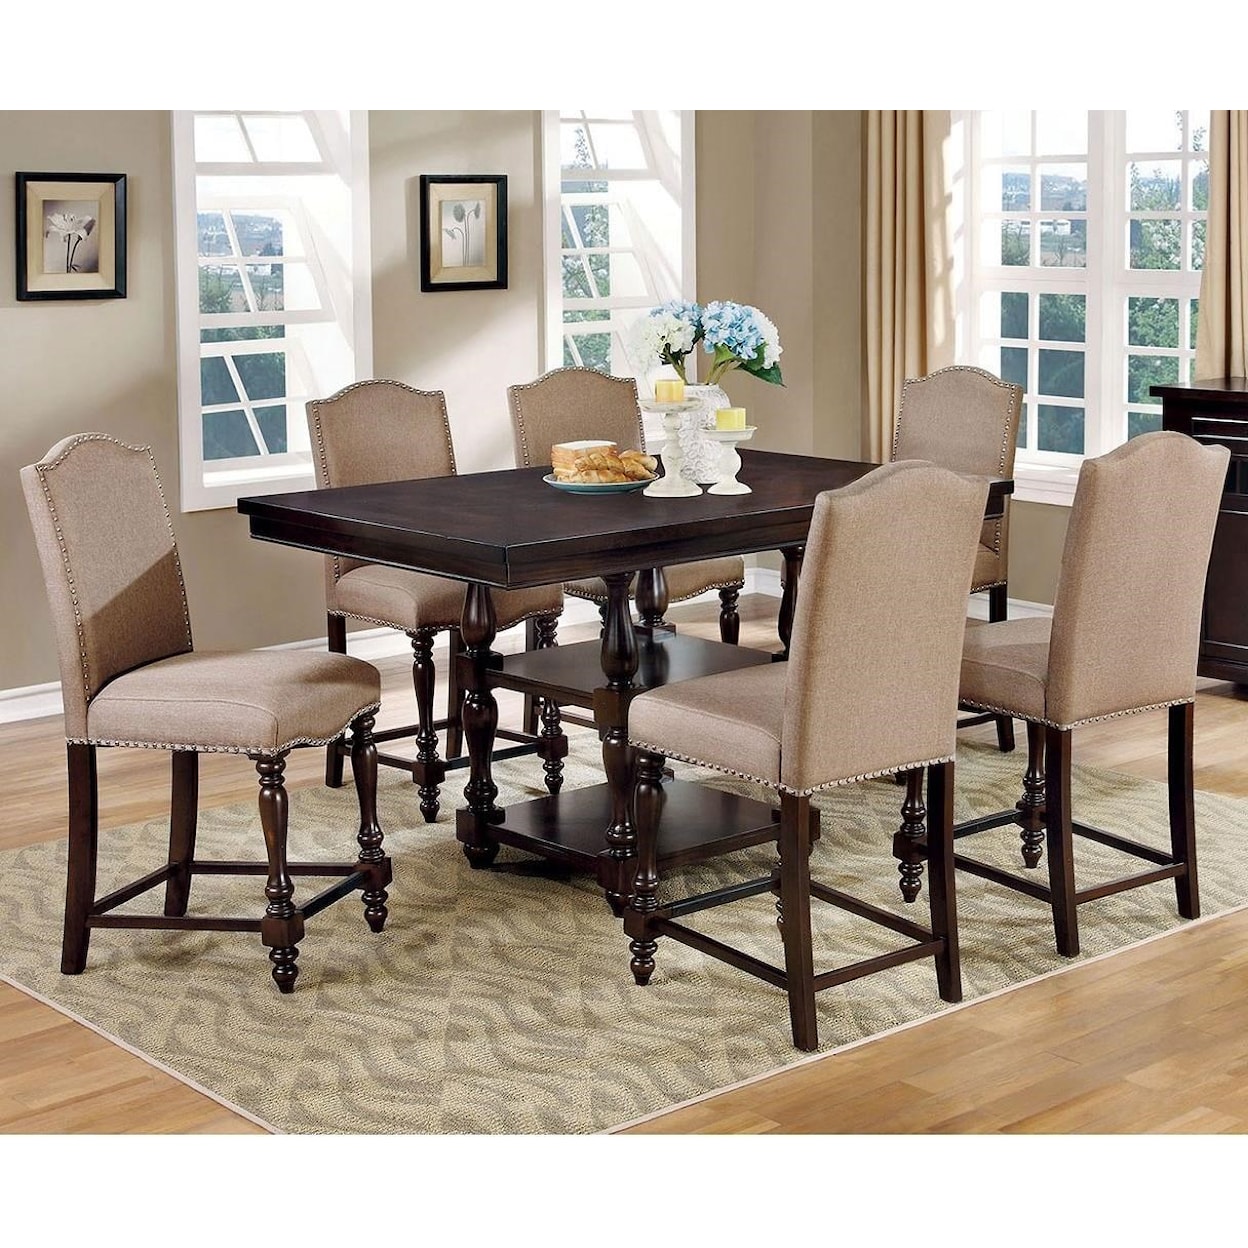 FUSA Hurdsfield Table and 6 Chairs